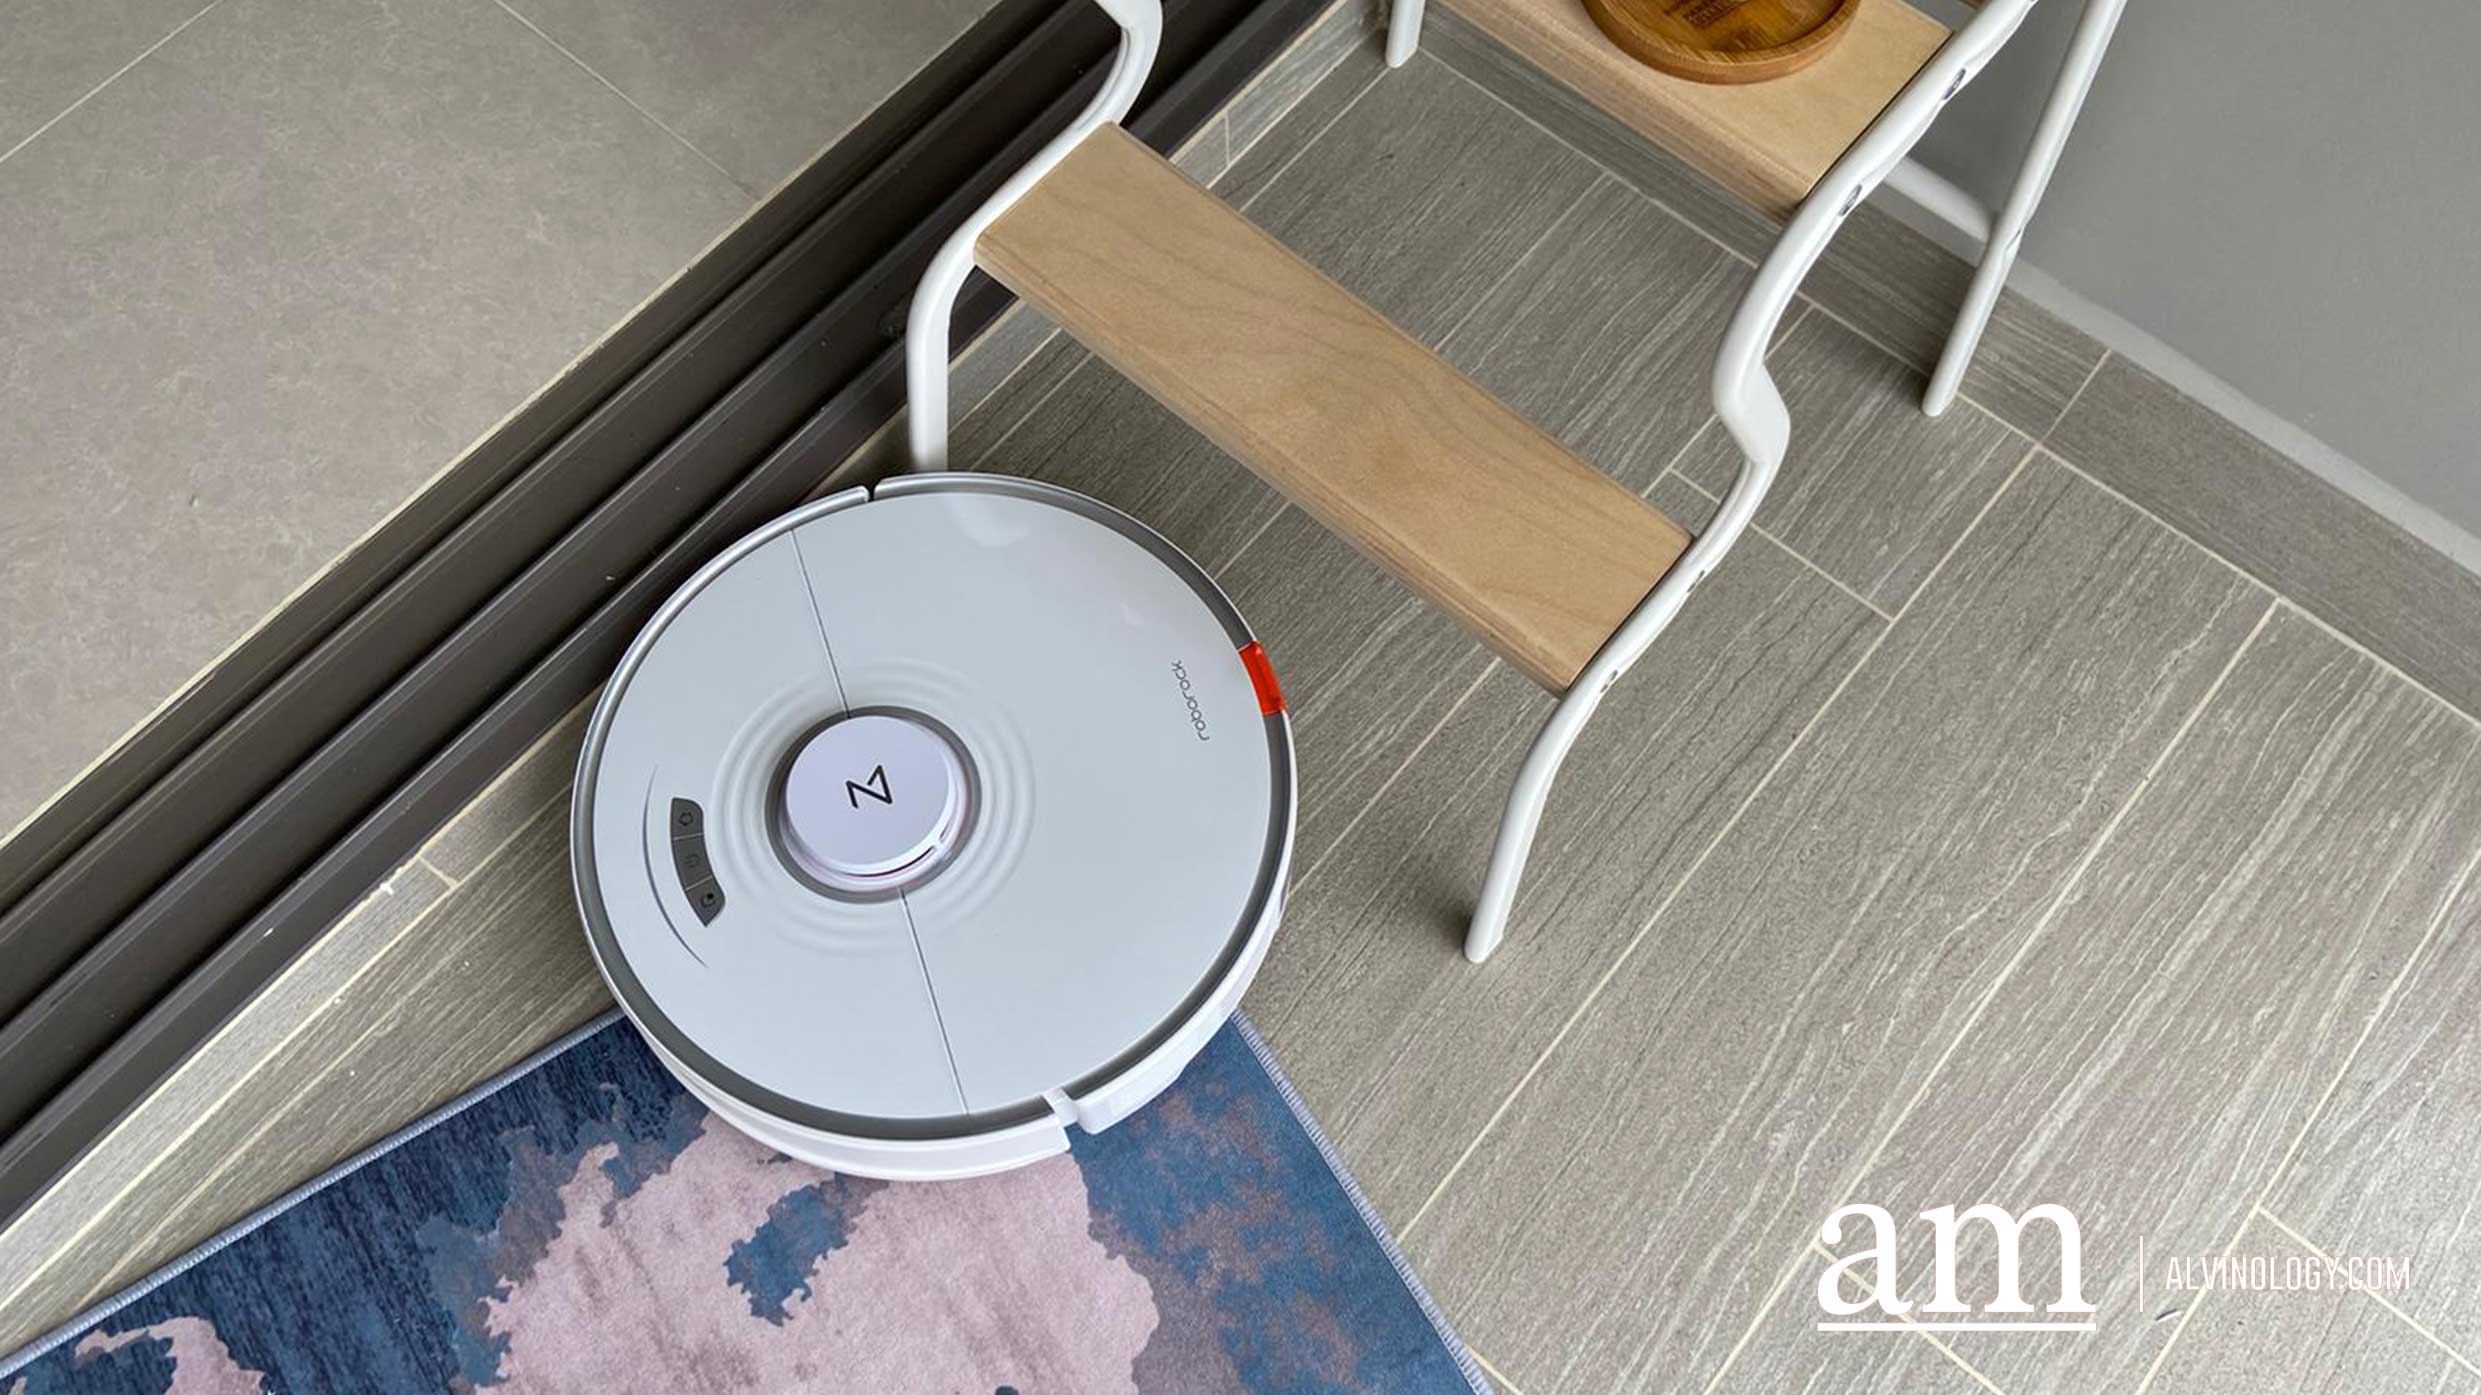 Roborock S7 robot vacuum review - Uses sonic vibration to mop up gunk - The  Gadgeteer